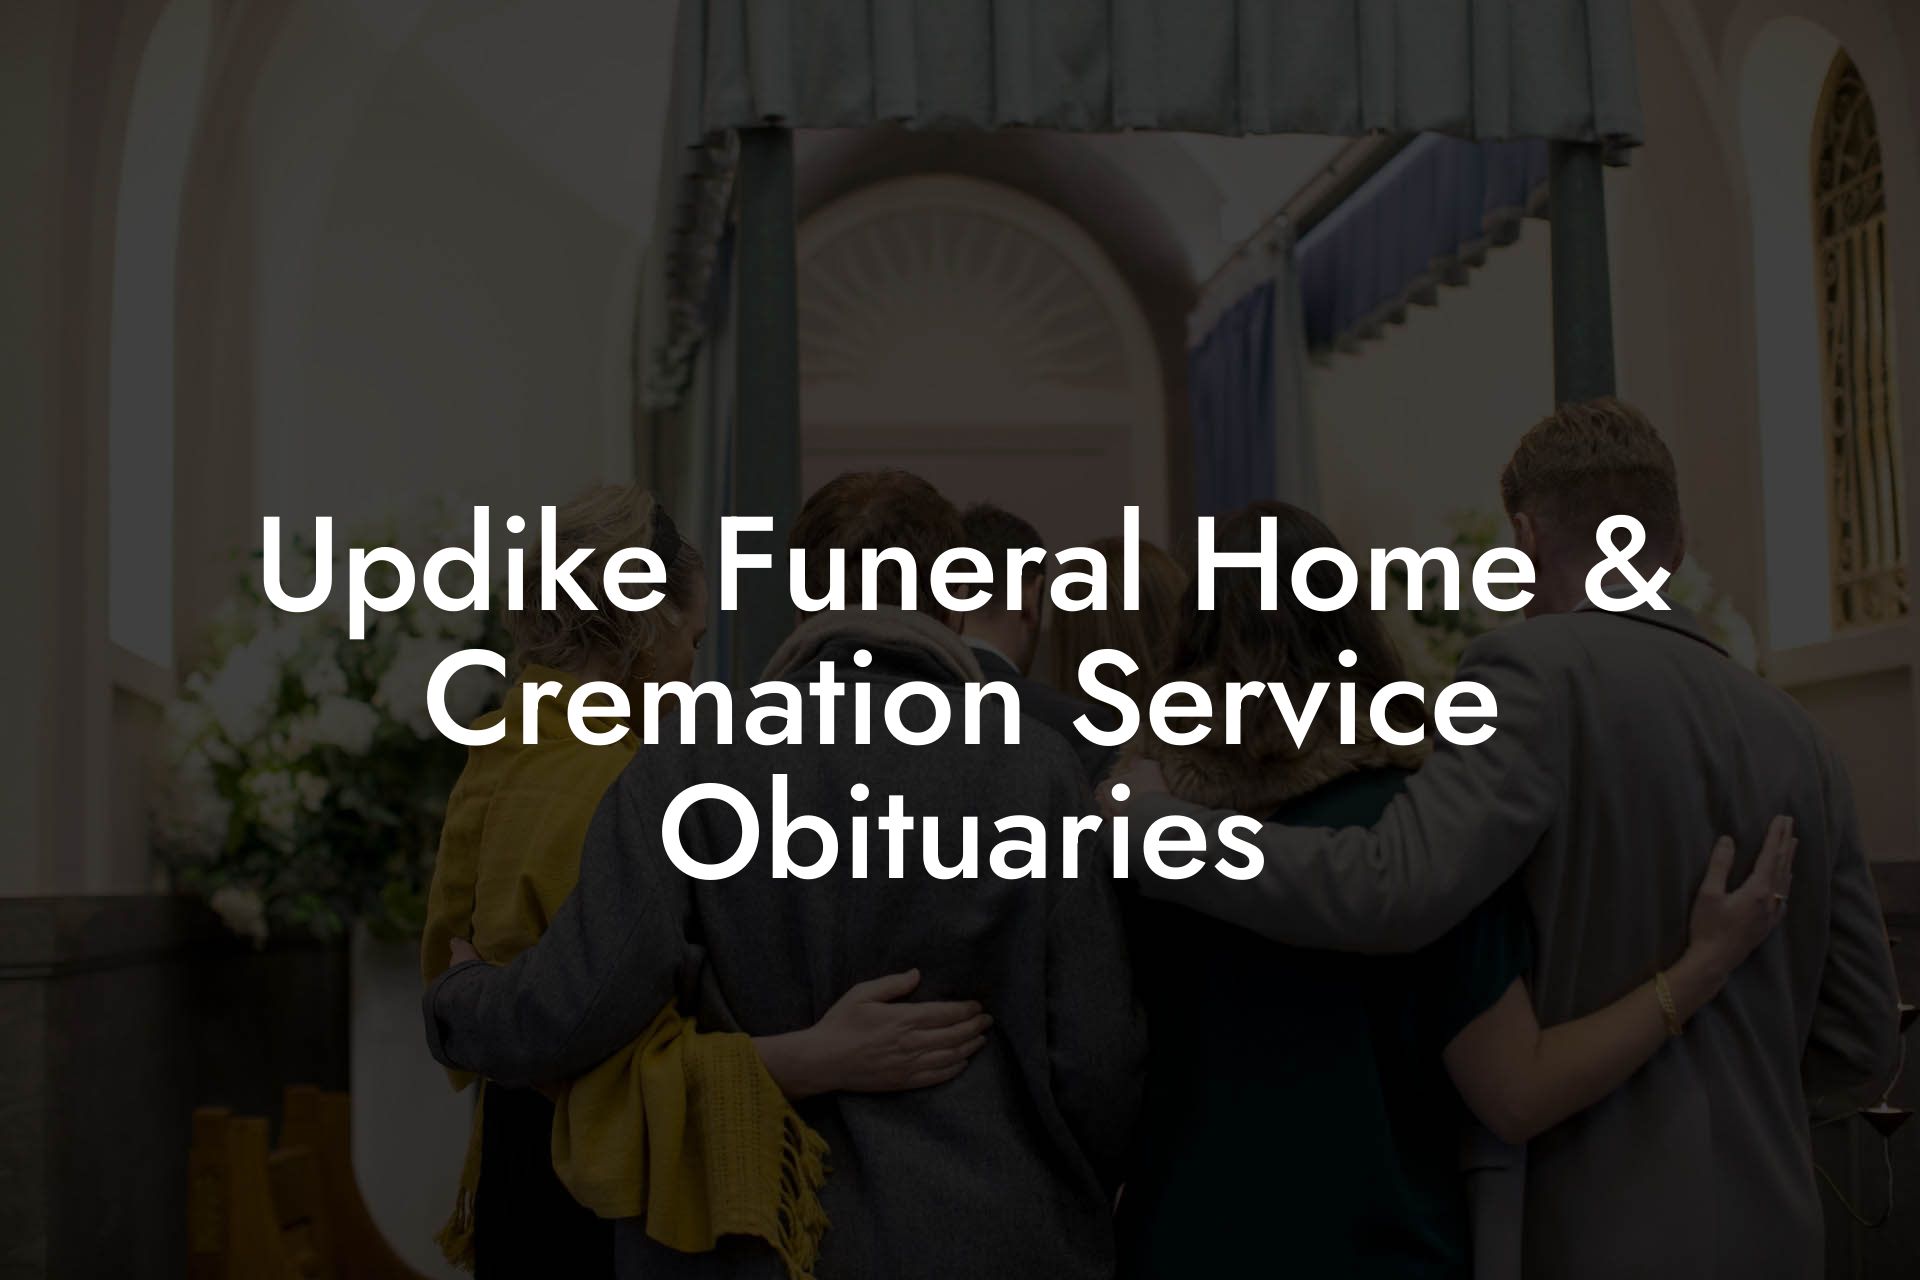 Updike Funeral Home & Cremation Service Obituaries